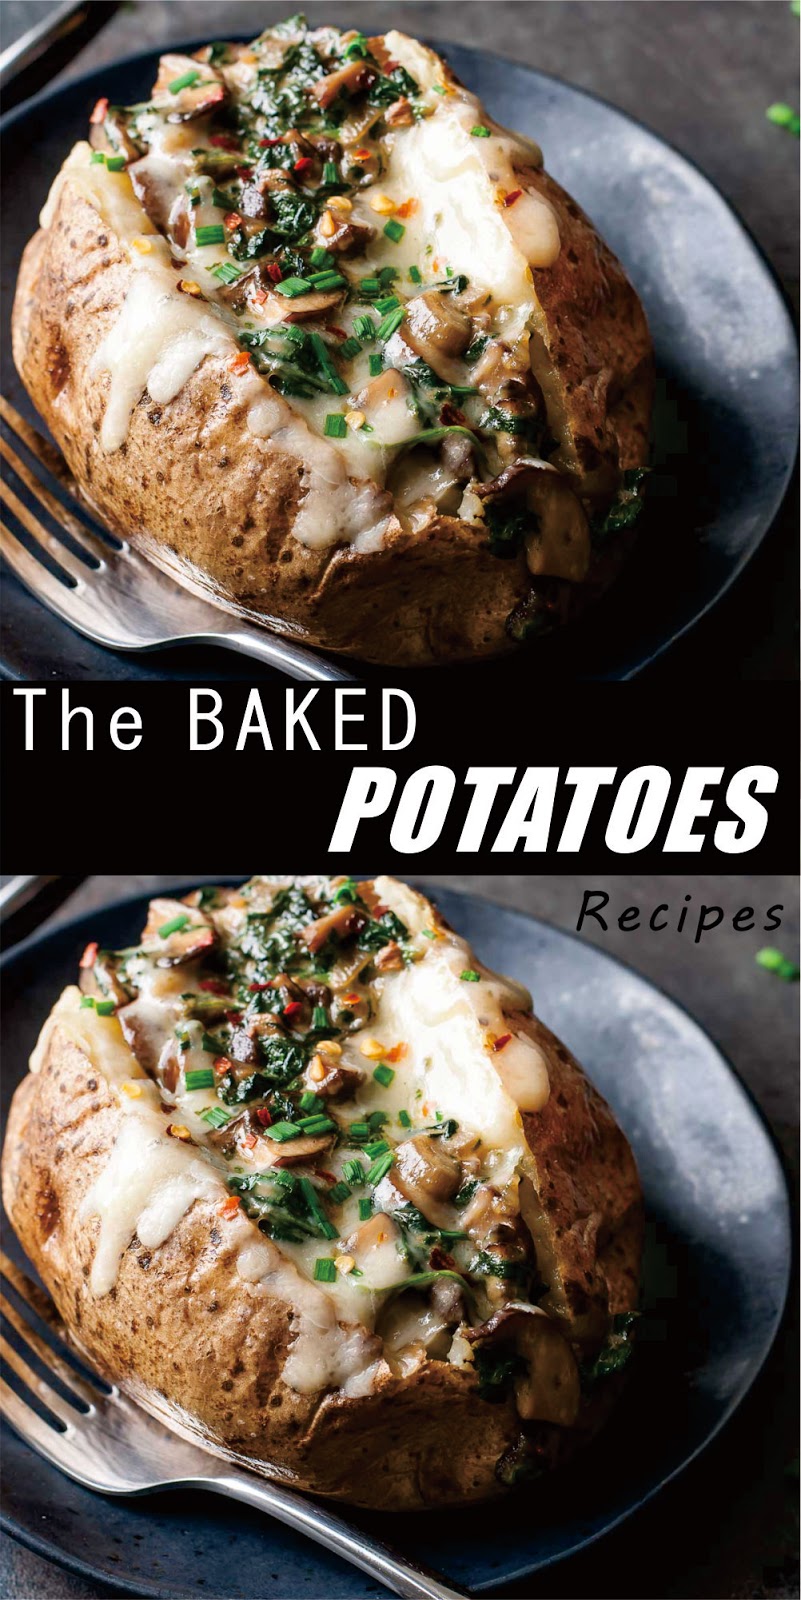 THE BAKED POTATOES